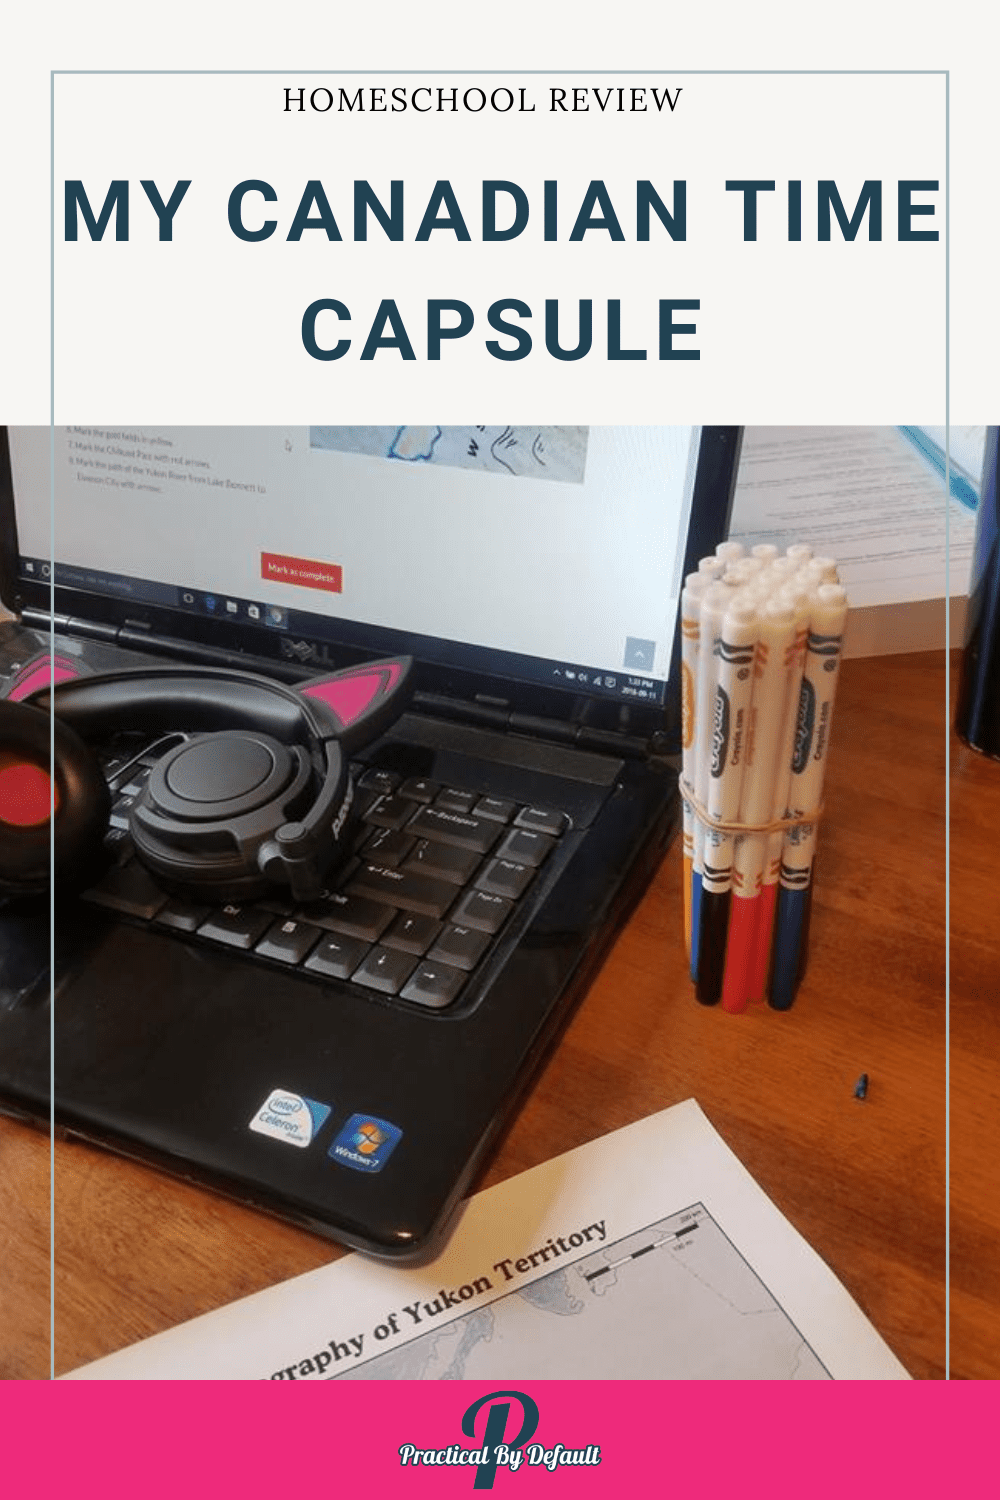 Teaching Canadian History With My Canadian Time Capsule – Hands-On History